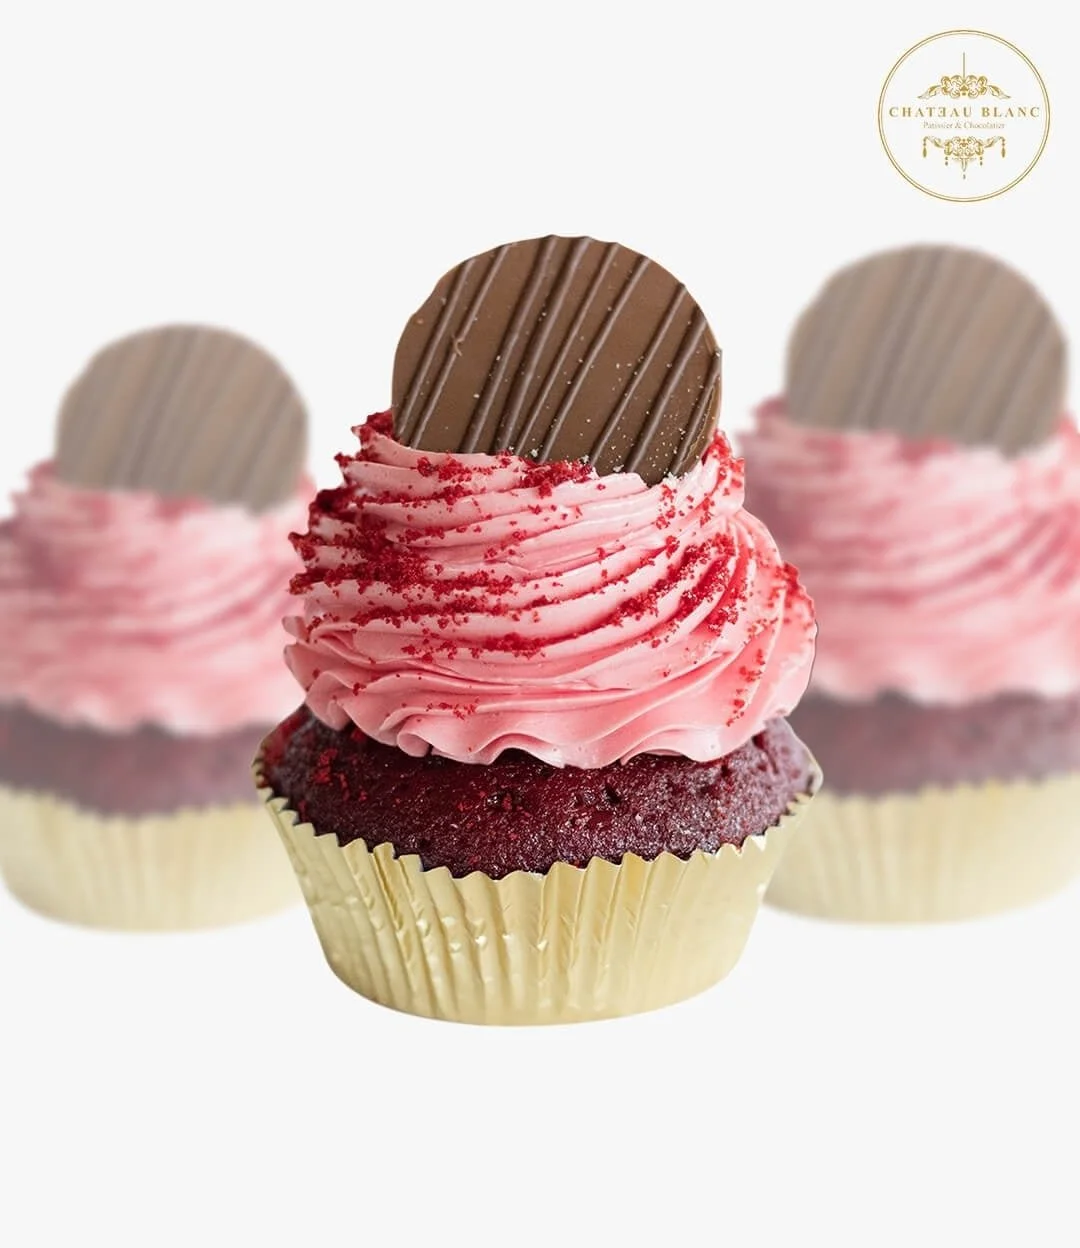 Red Velvet Cupcake by Chateau Blanc 